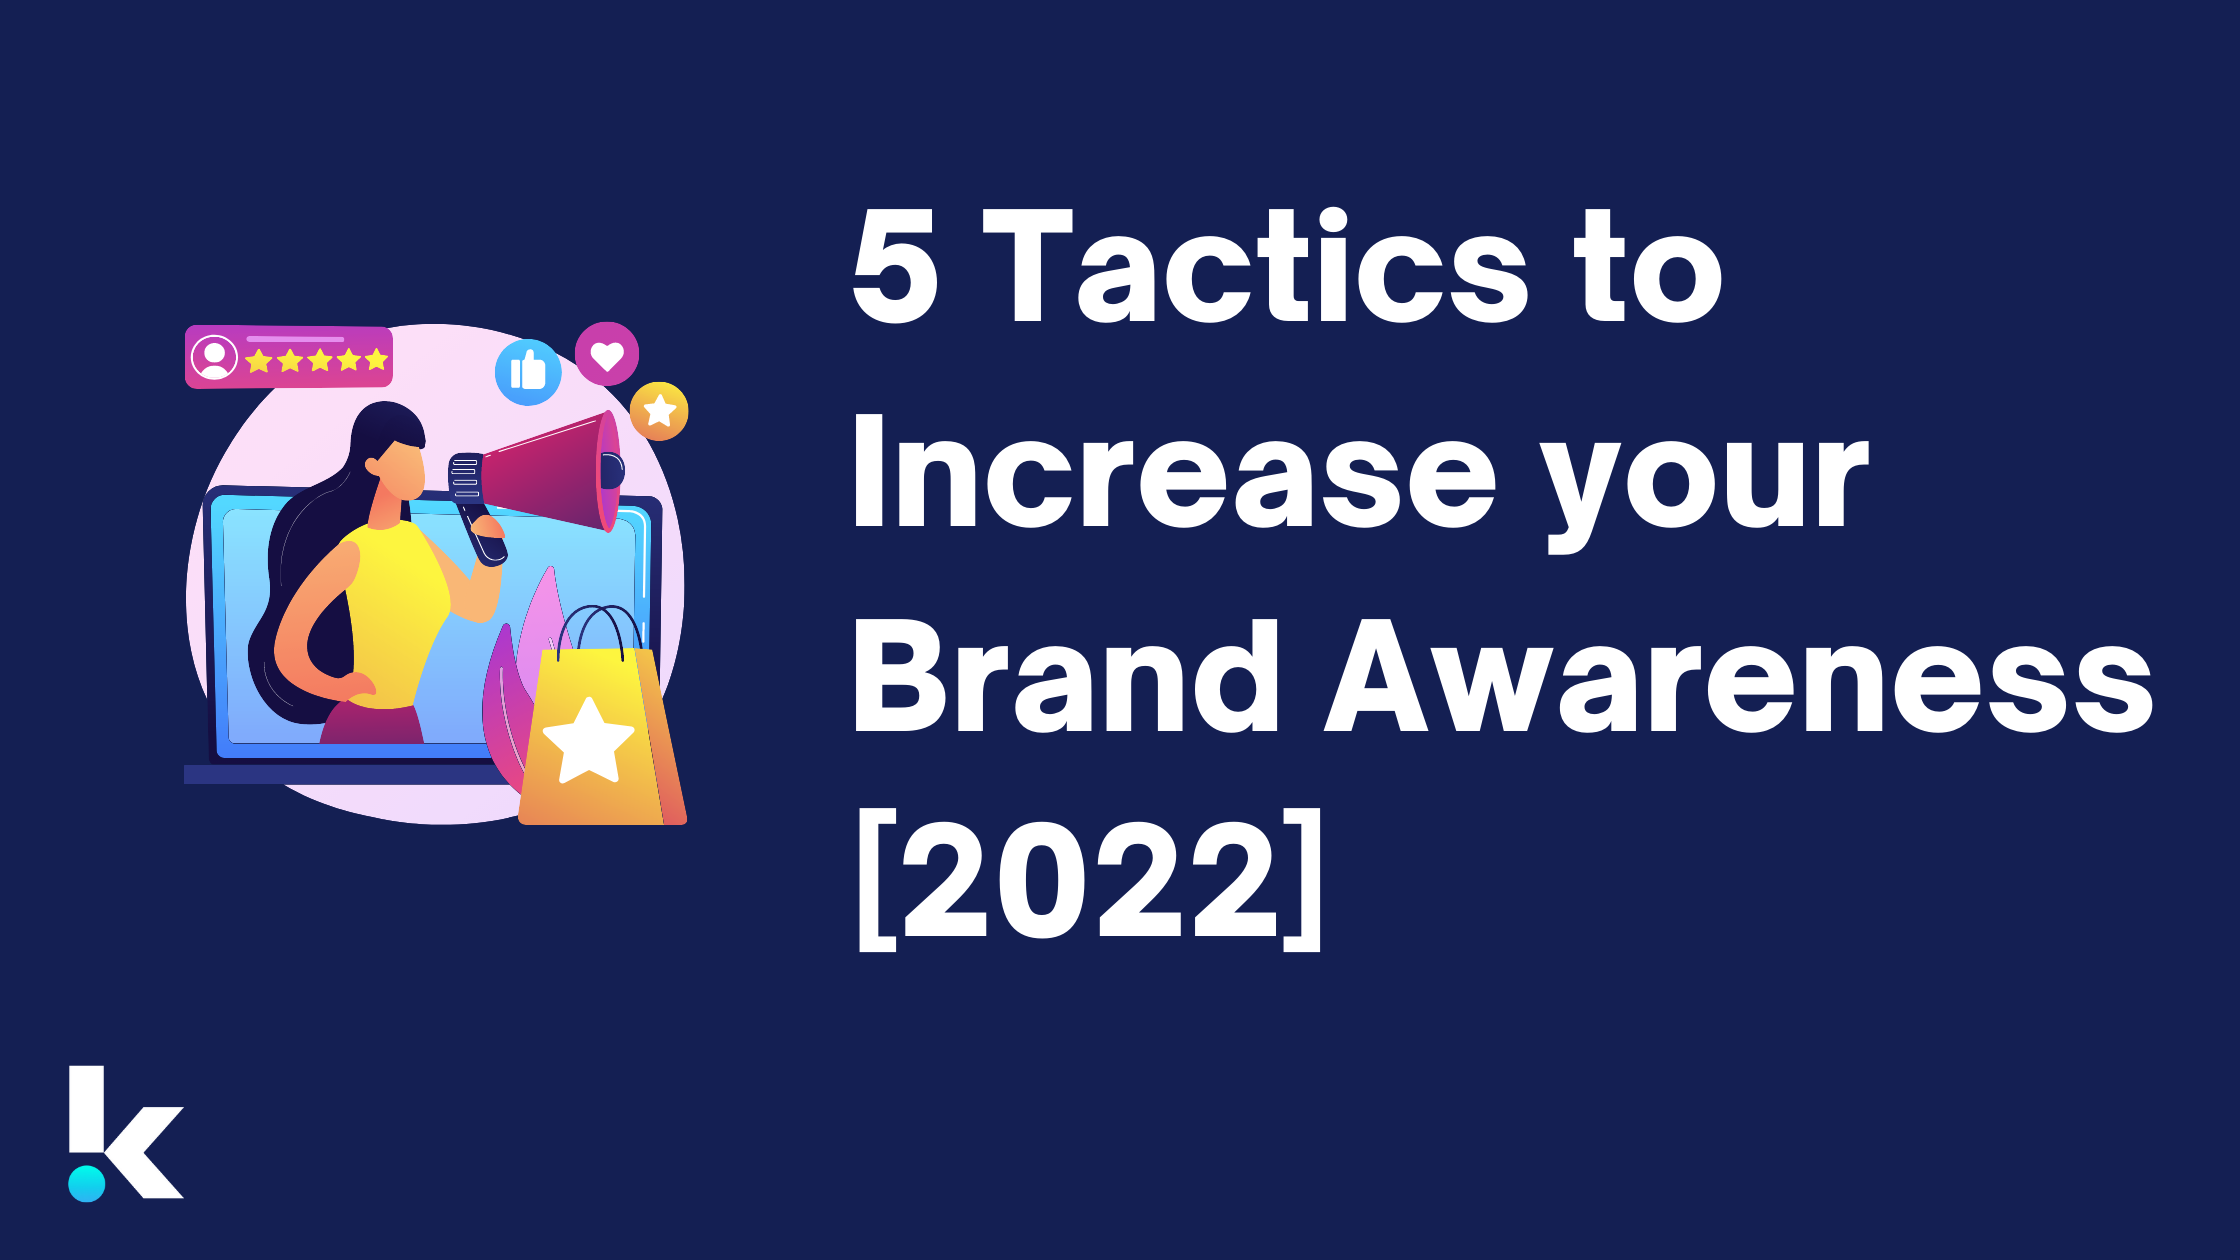 Five Tactics to Increase Your Brand Awareness in 2022